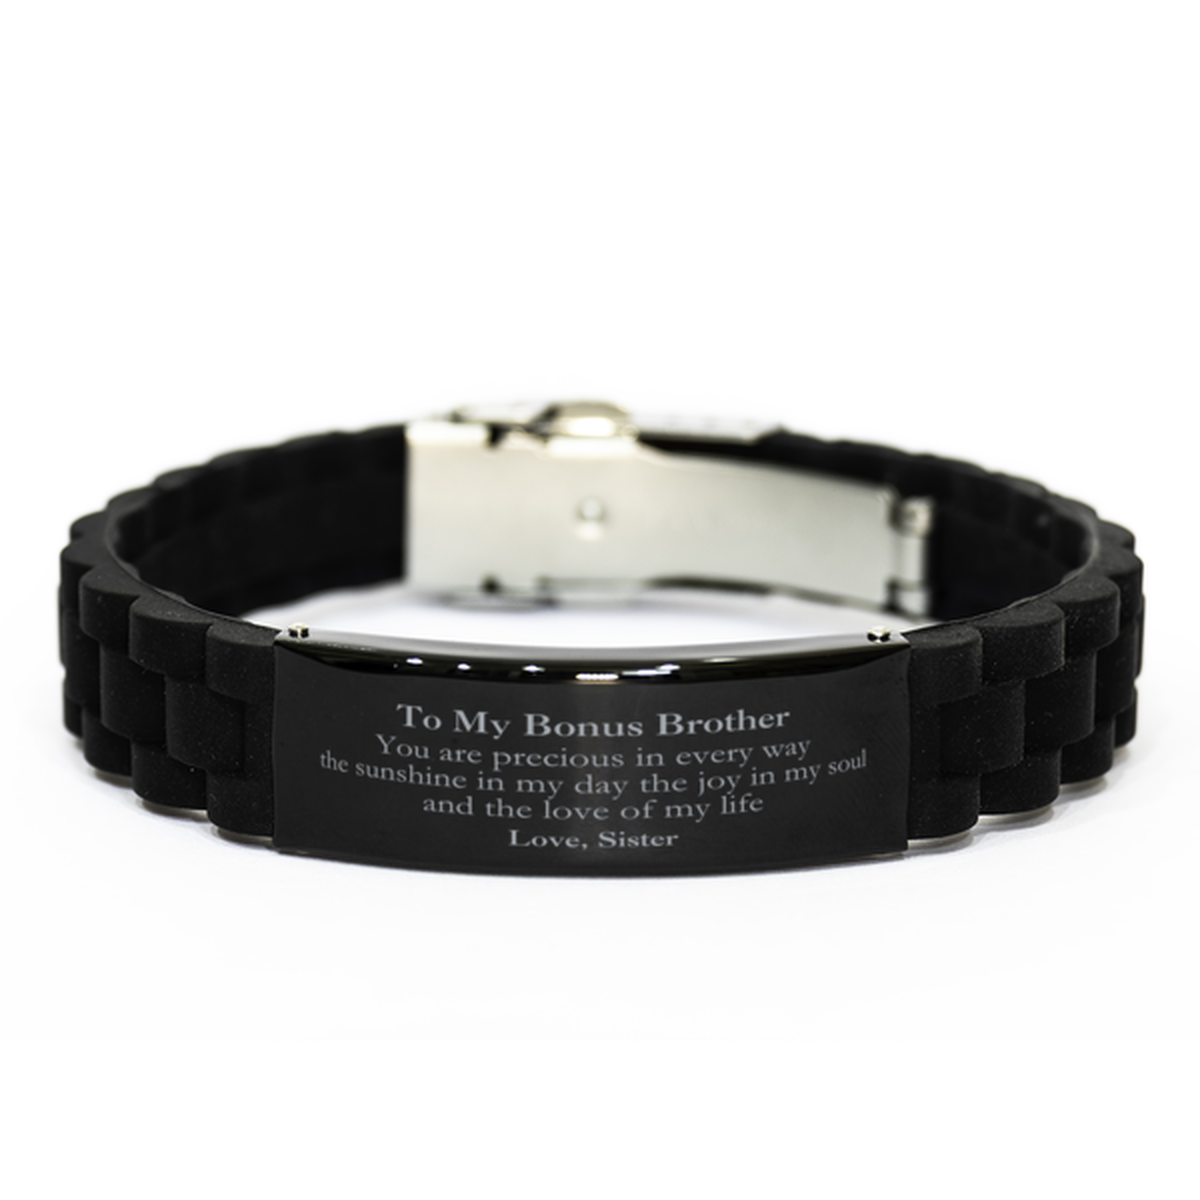 Graduation Gifts for Bonus Brother Black Glidelock Clasp Bracelet Present from Sister, Christmas Bonus Brother Birthday Gifts Bonus Brother You are precious in every way the sunshine in my day. Love, Sister